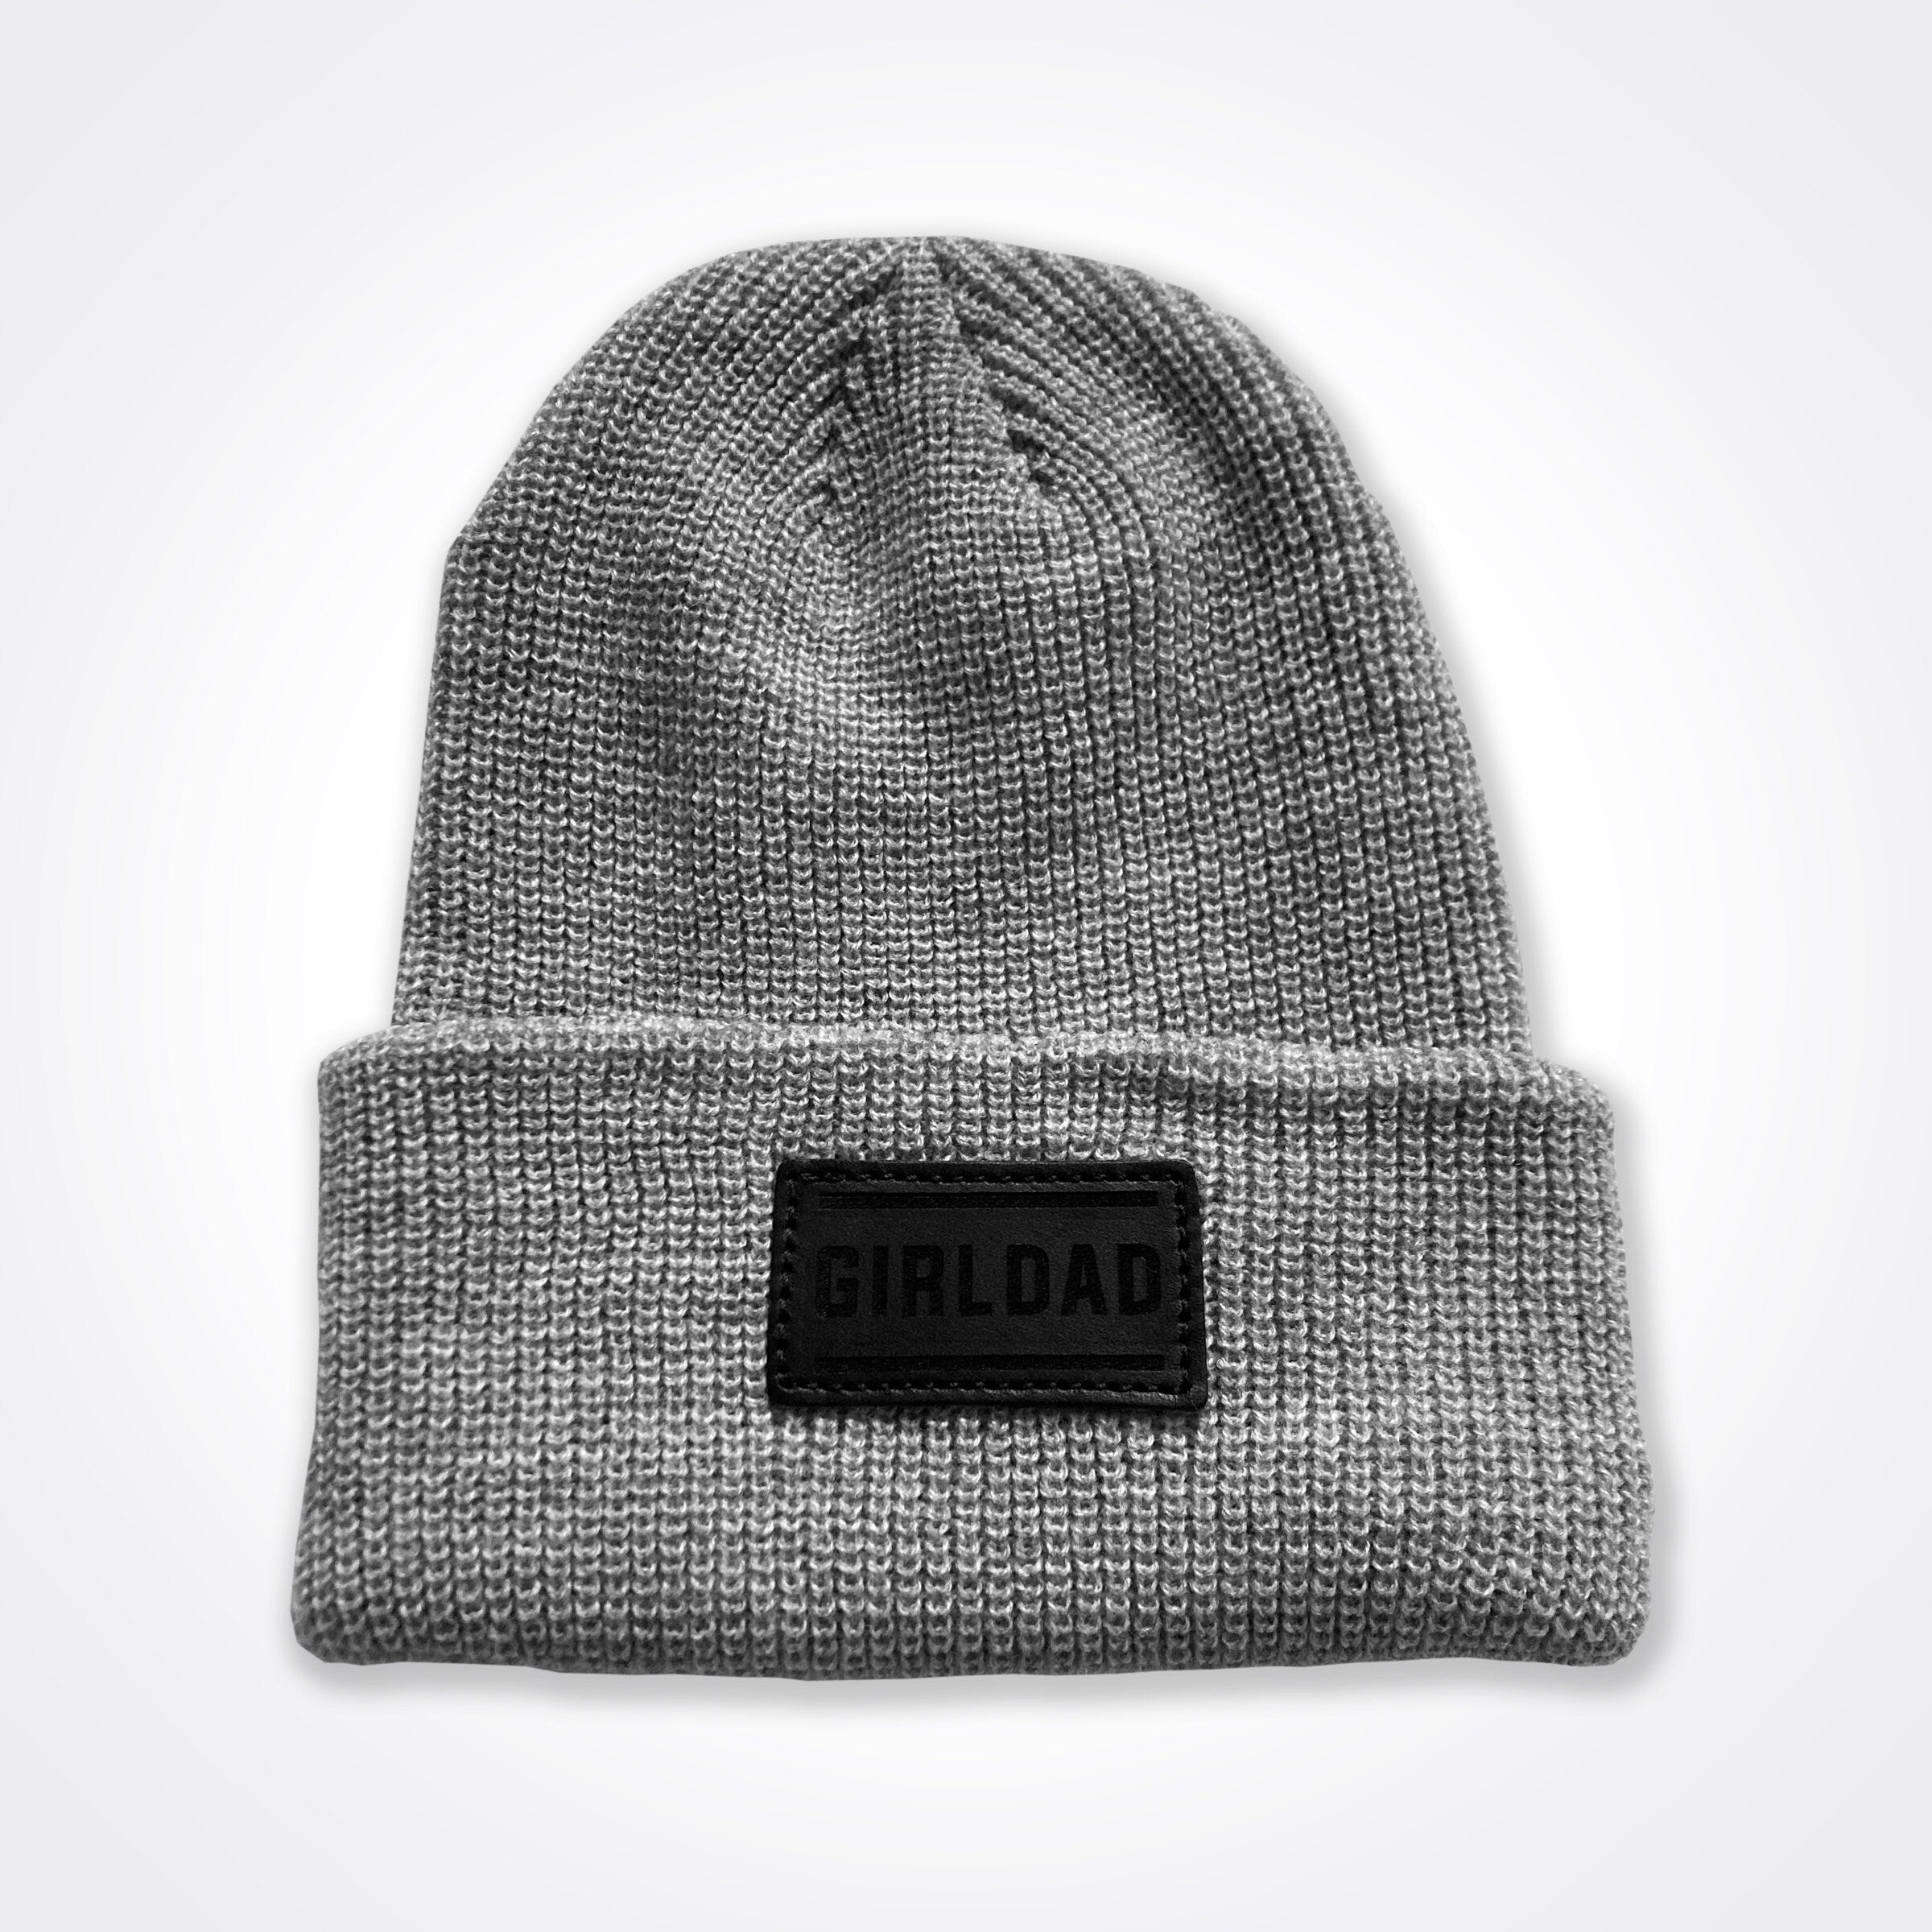 Girldad® Leather Patch Classic Beanie In Black, Light Grey, Grey, Classic Winter Hat, Girl Dad, Girl Dad Gift, Dad of Girls